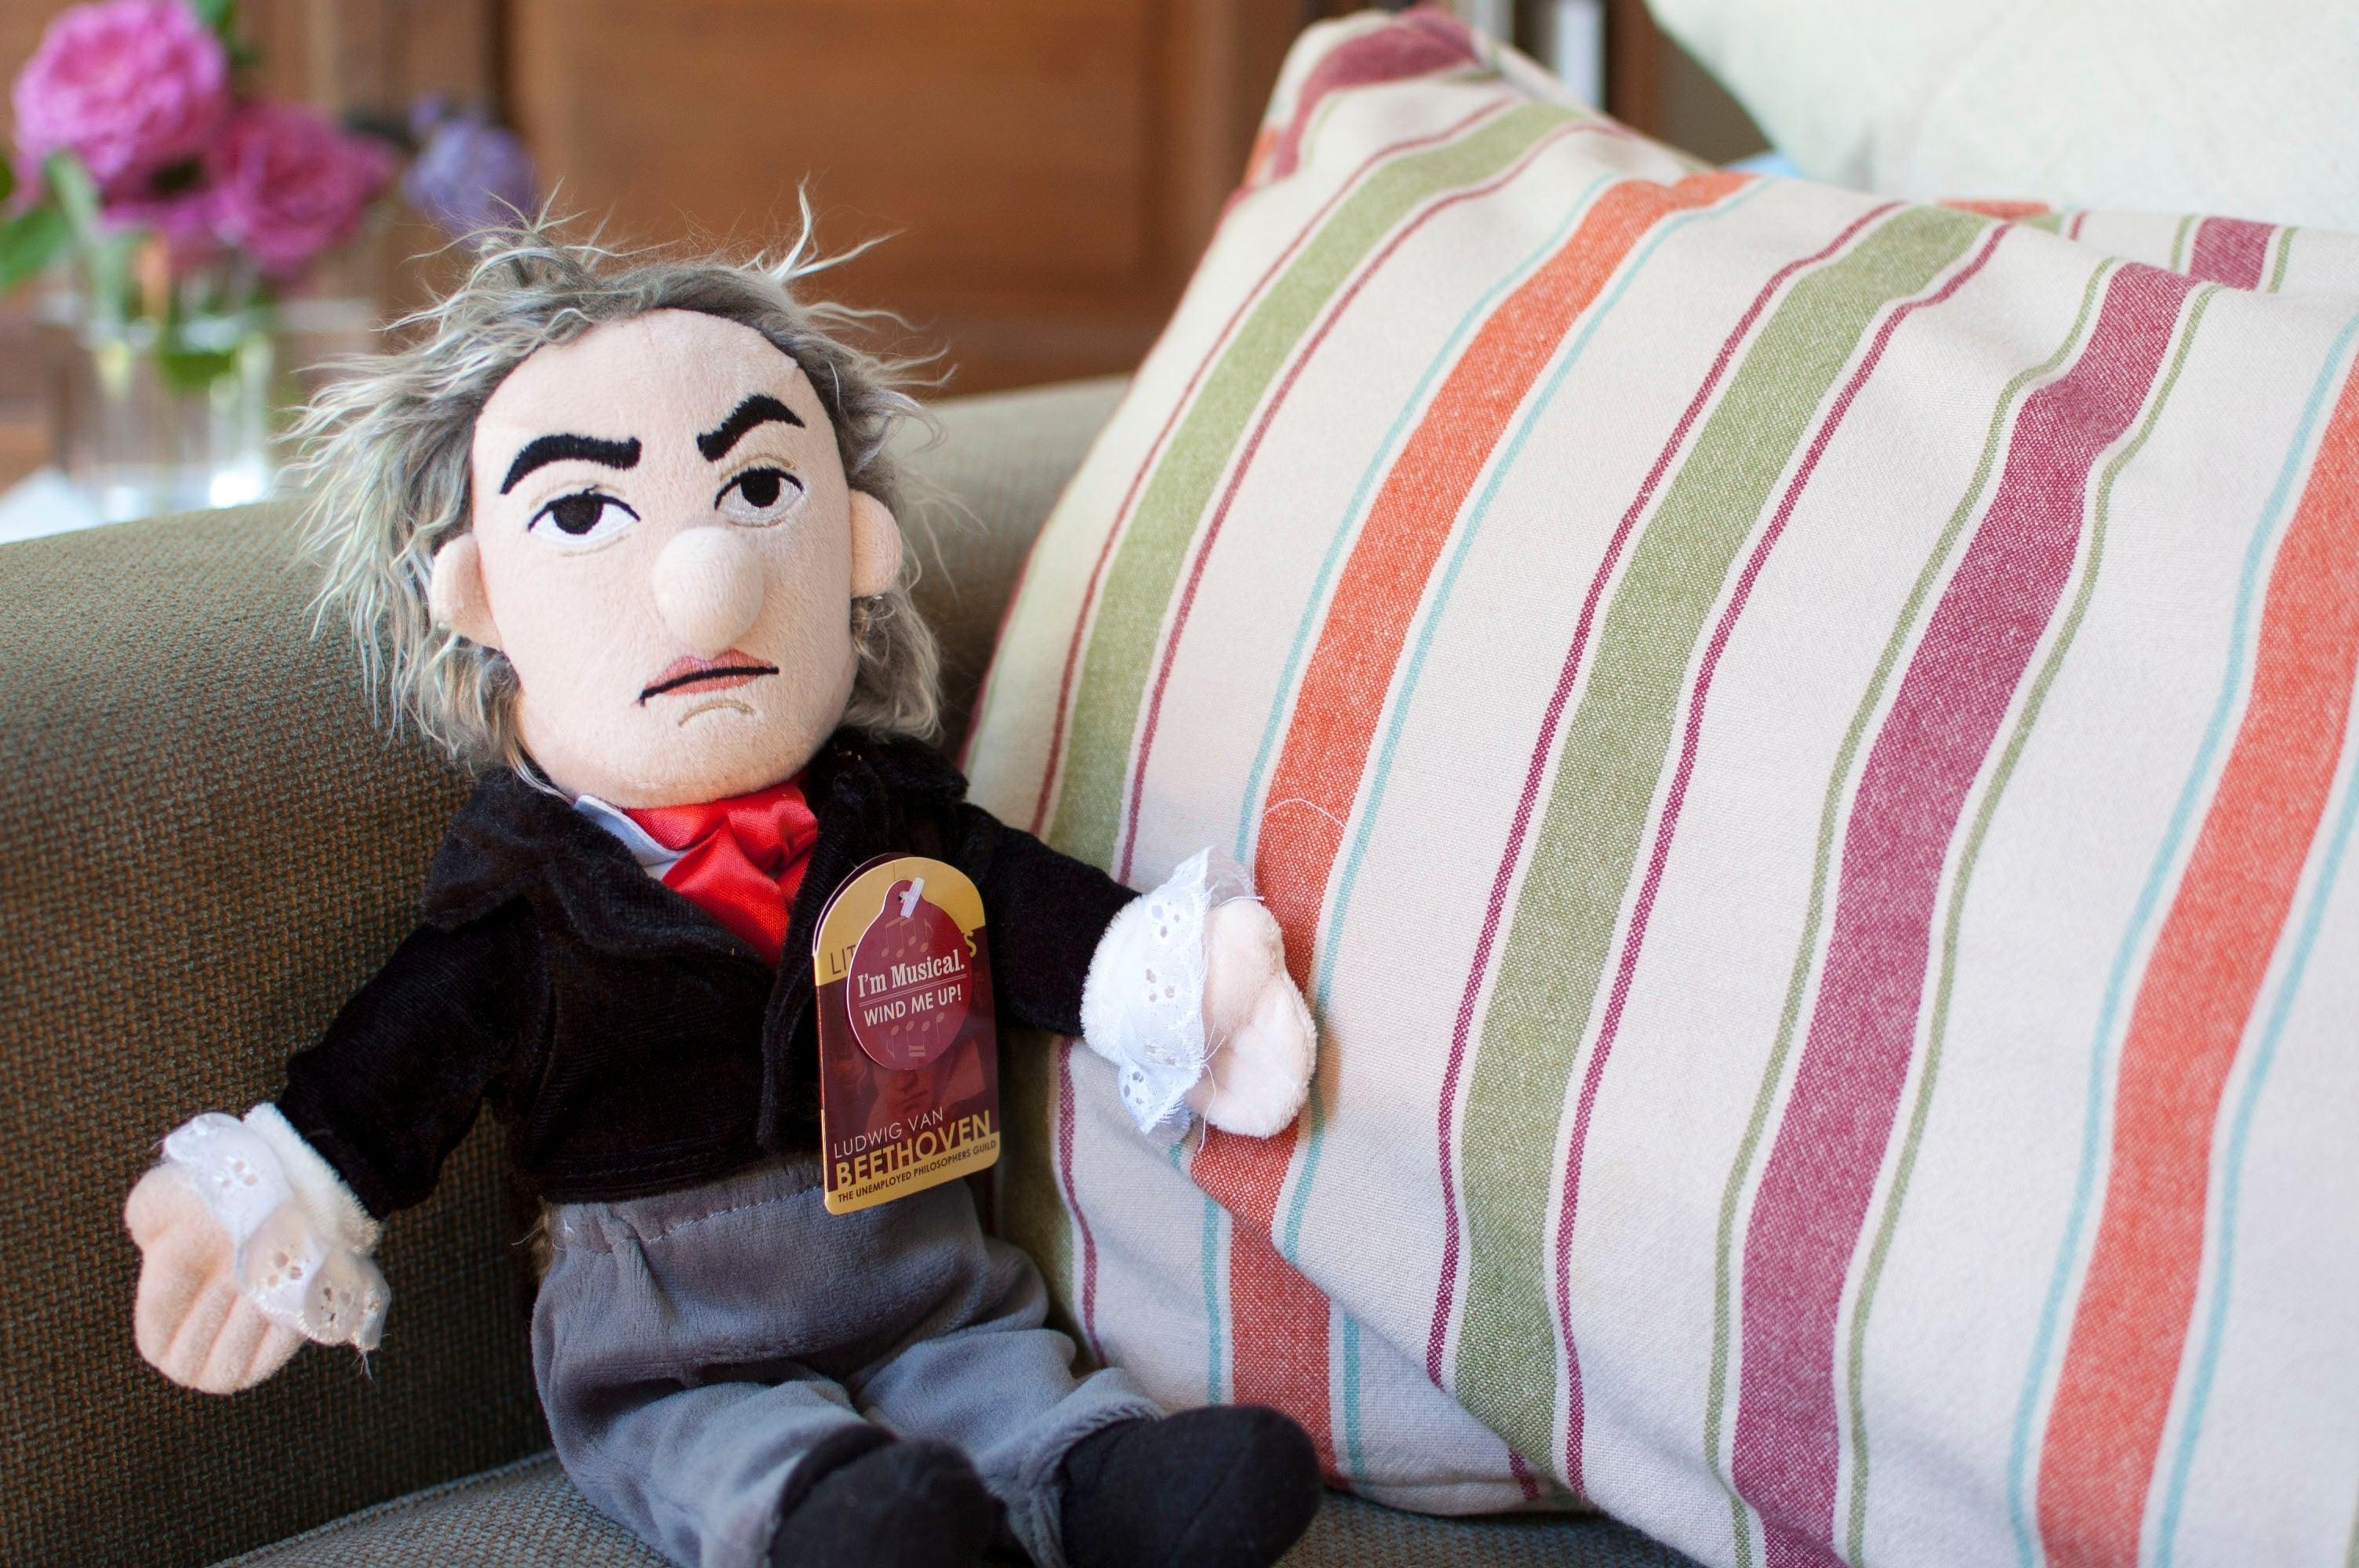 Product photo of Beethoven Plush Doll, a novelty gift manufactured by The Unemployed Philosophers Guild.